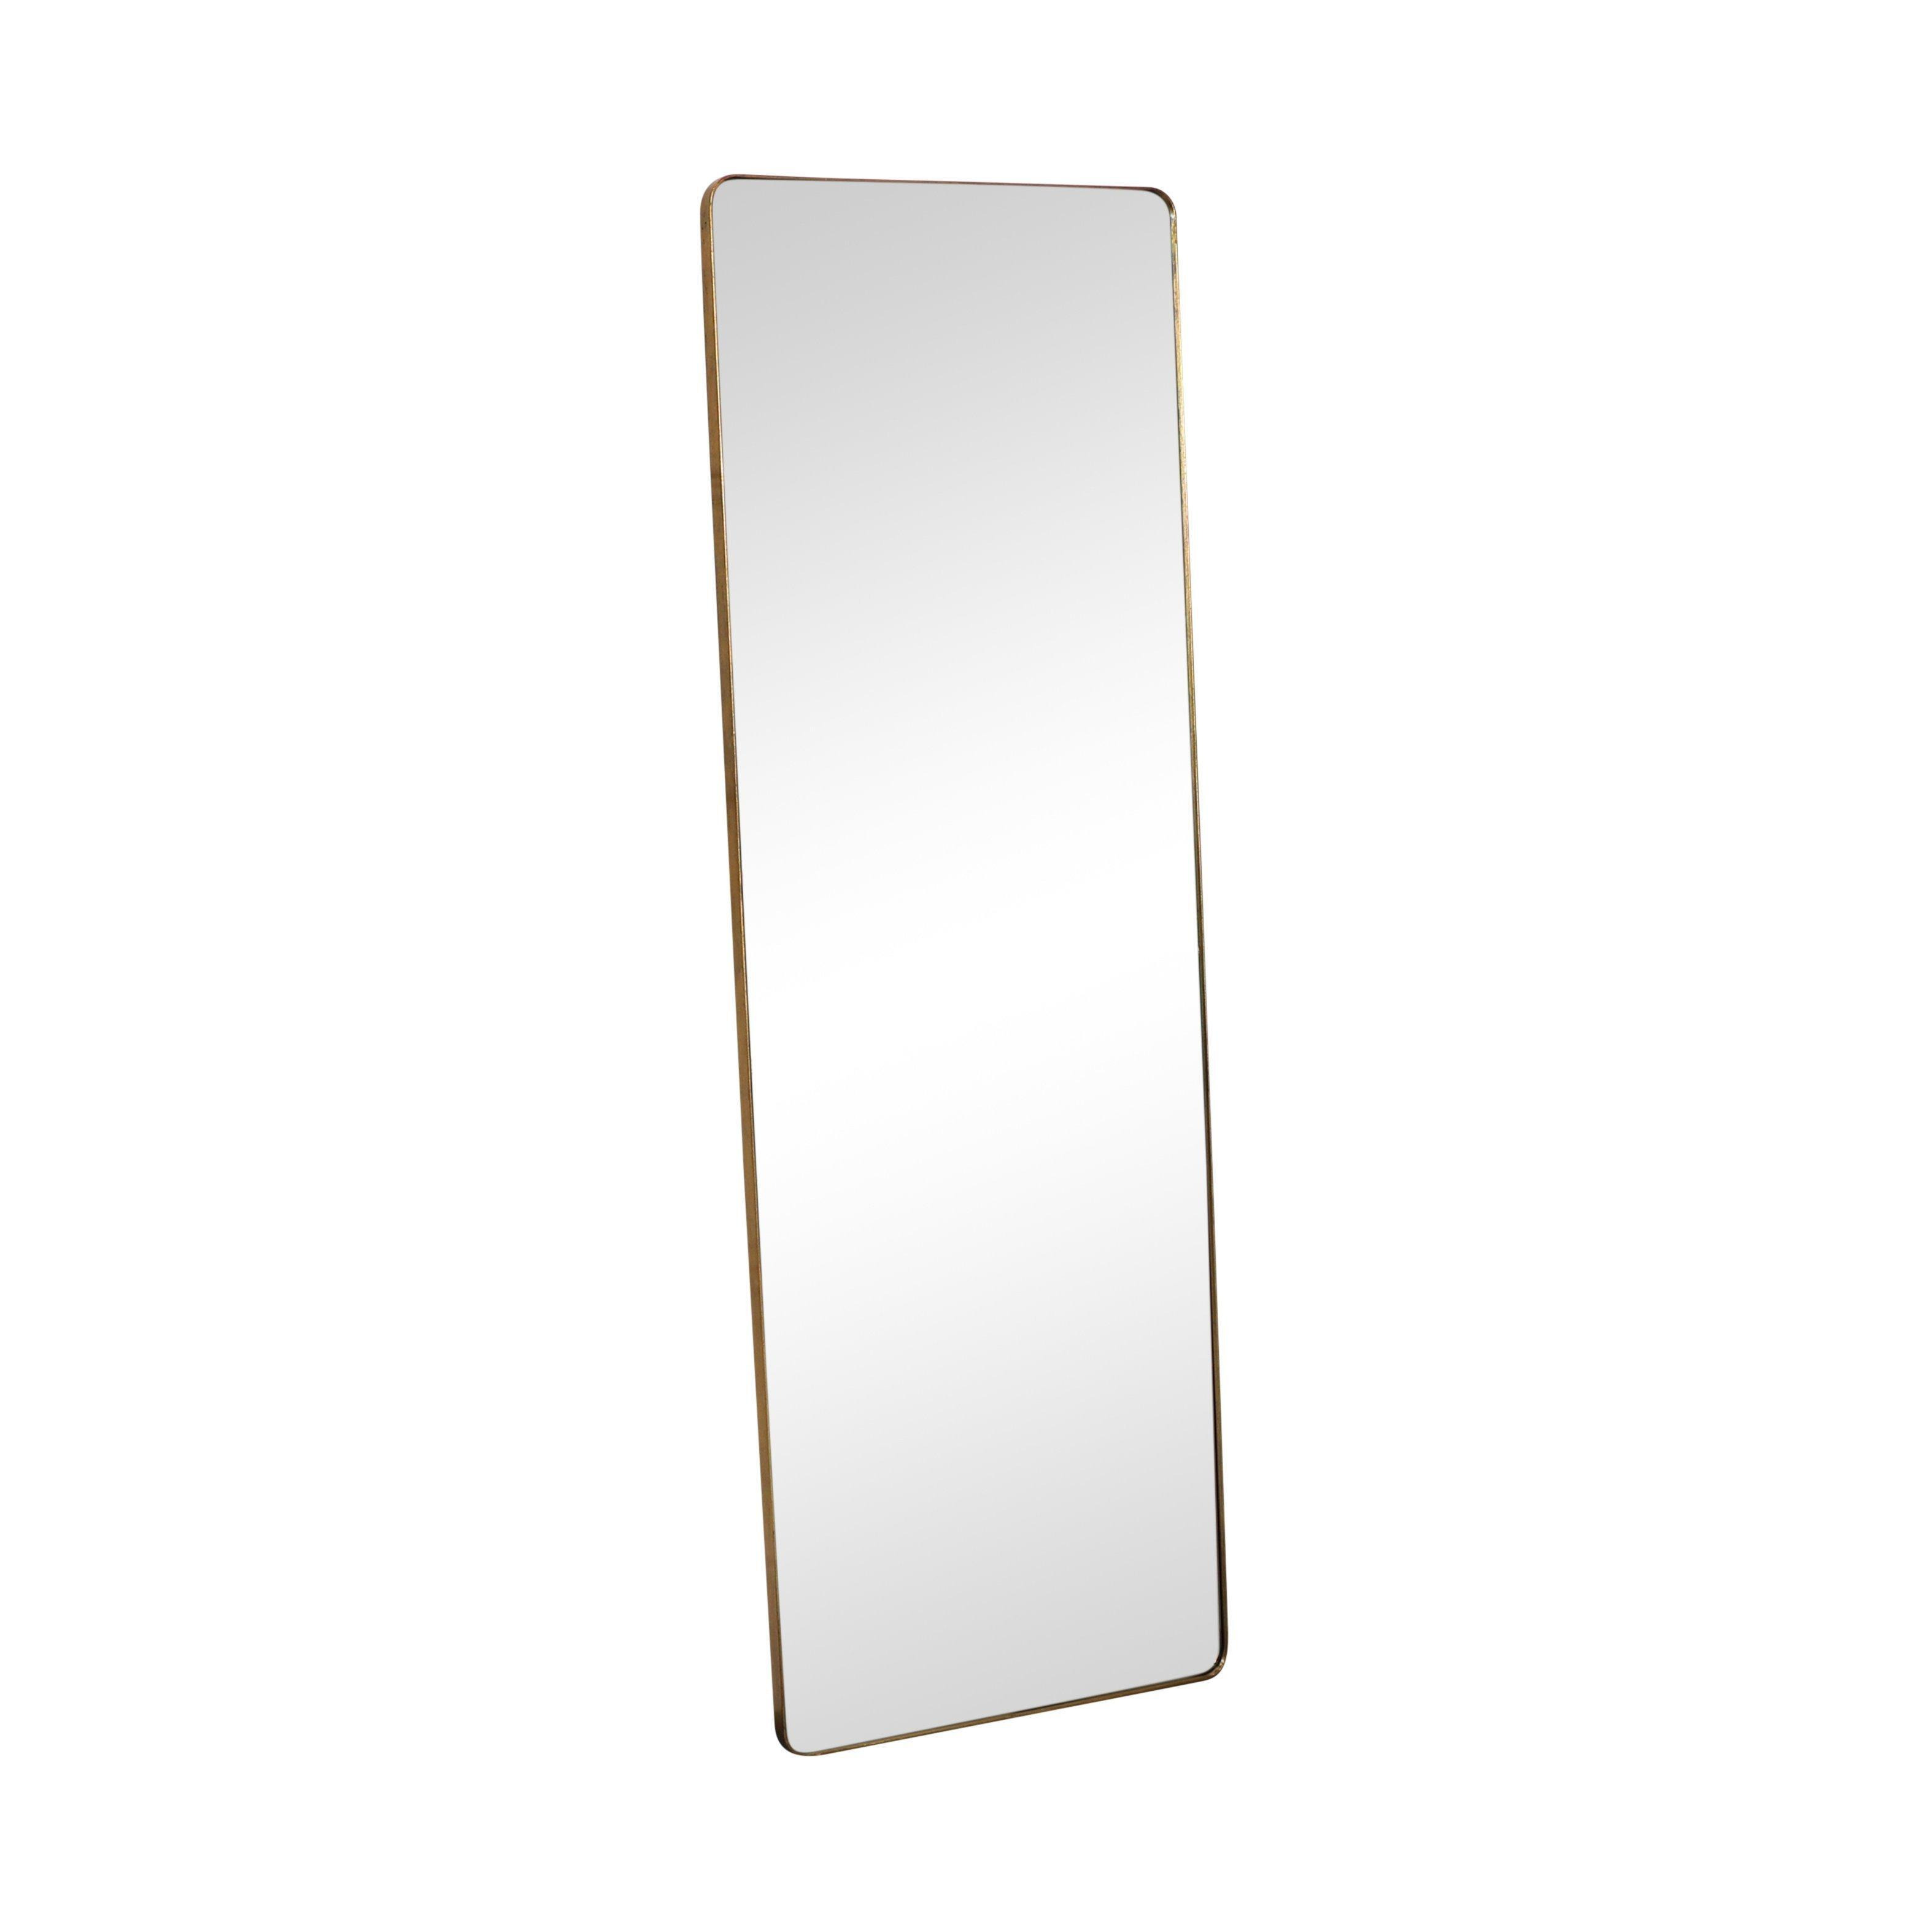 Large Brushed Gold Wall / Floor / Leaner Mirror 47cm X 142cm - image 1